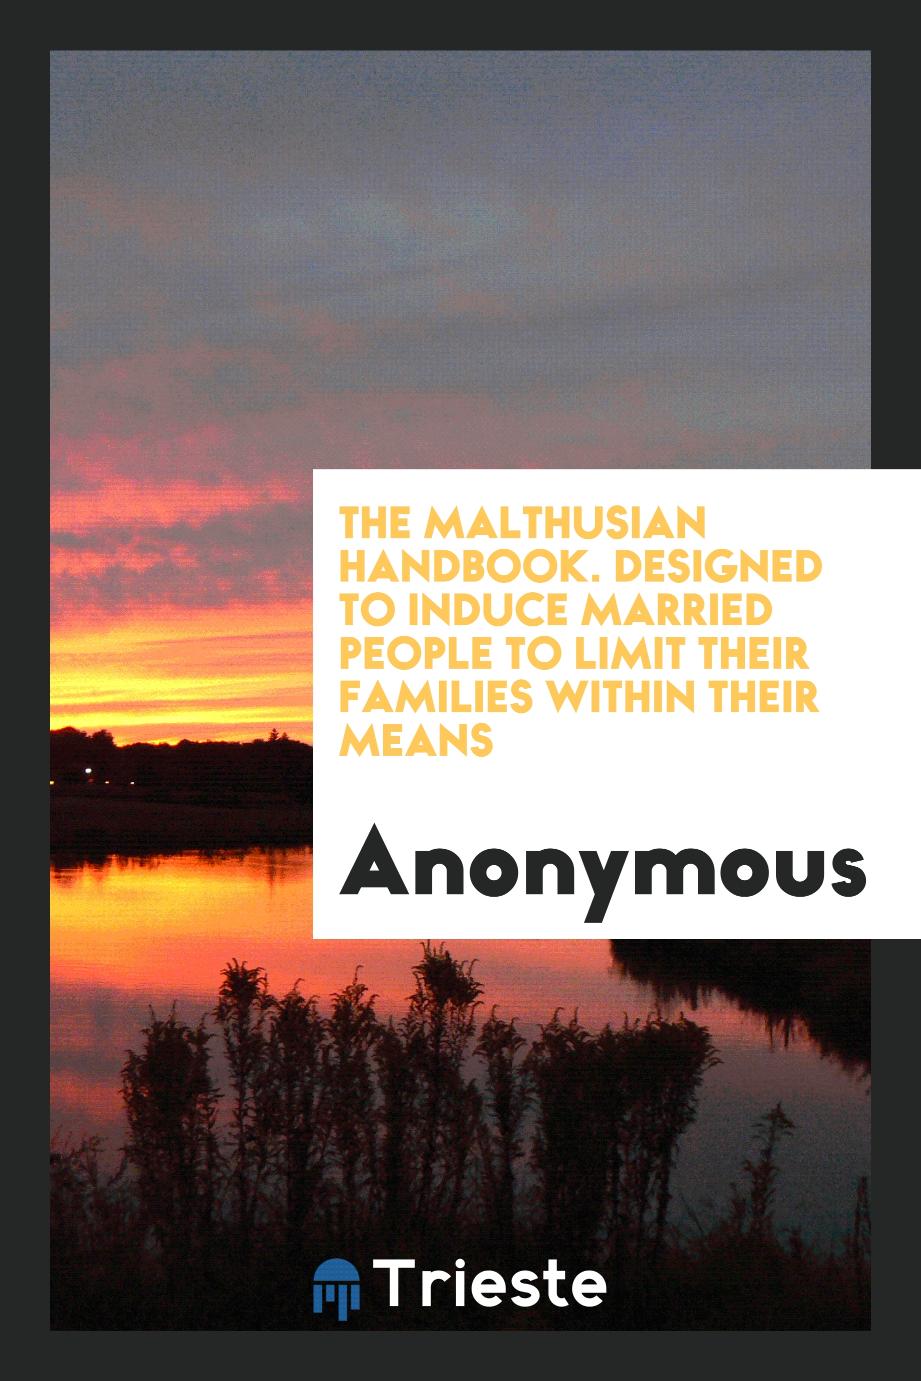 The Malthusian handbook. Designed to induce married people to limit their families within their means